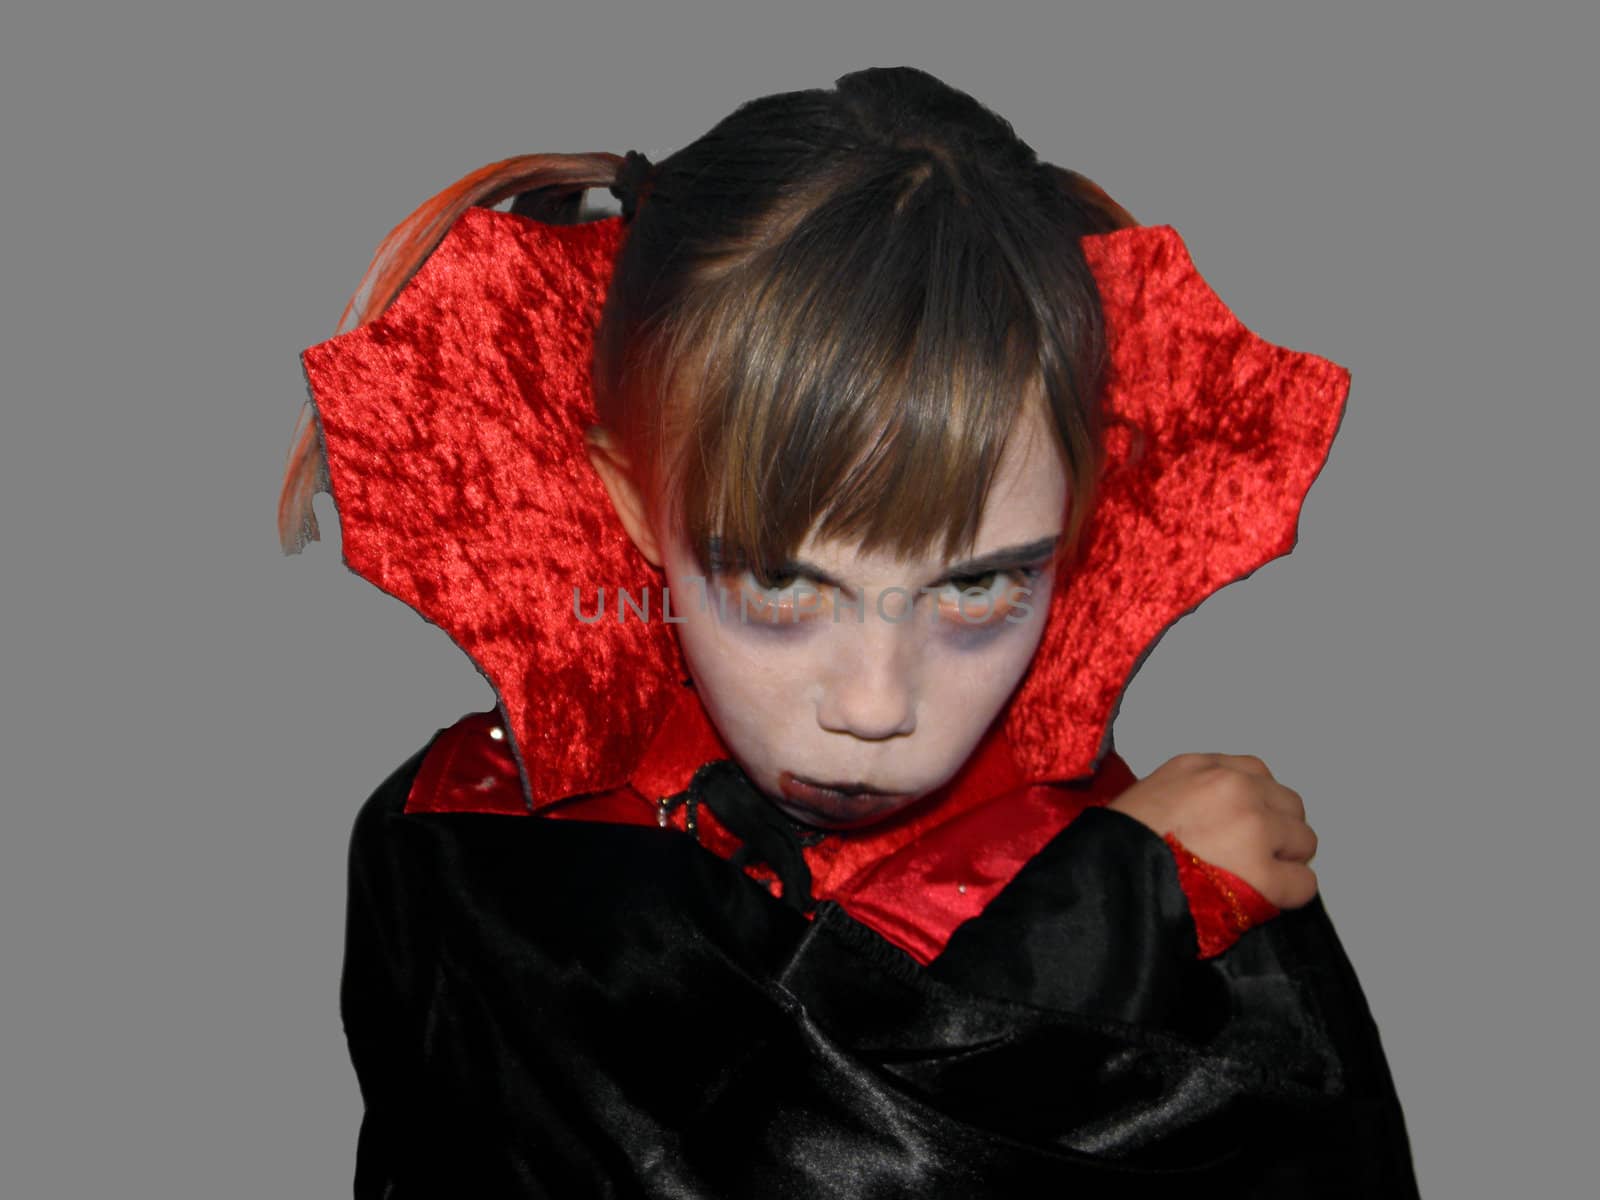 Photo of a girl who is dressed up as a vampire. Exempted person.